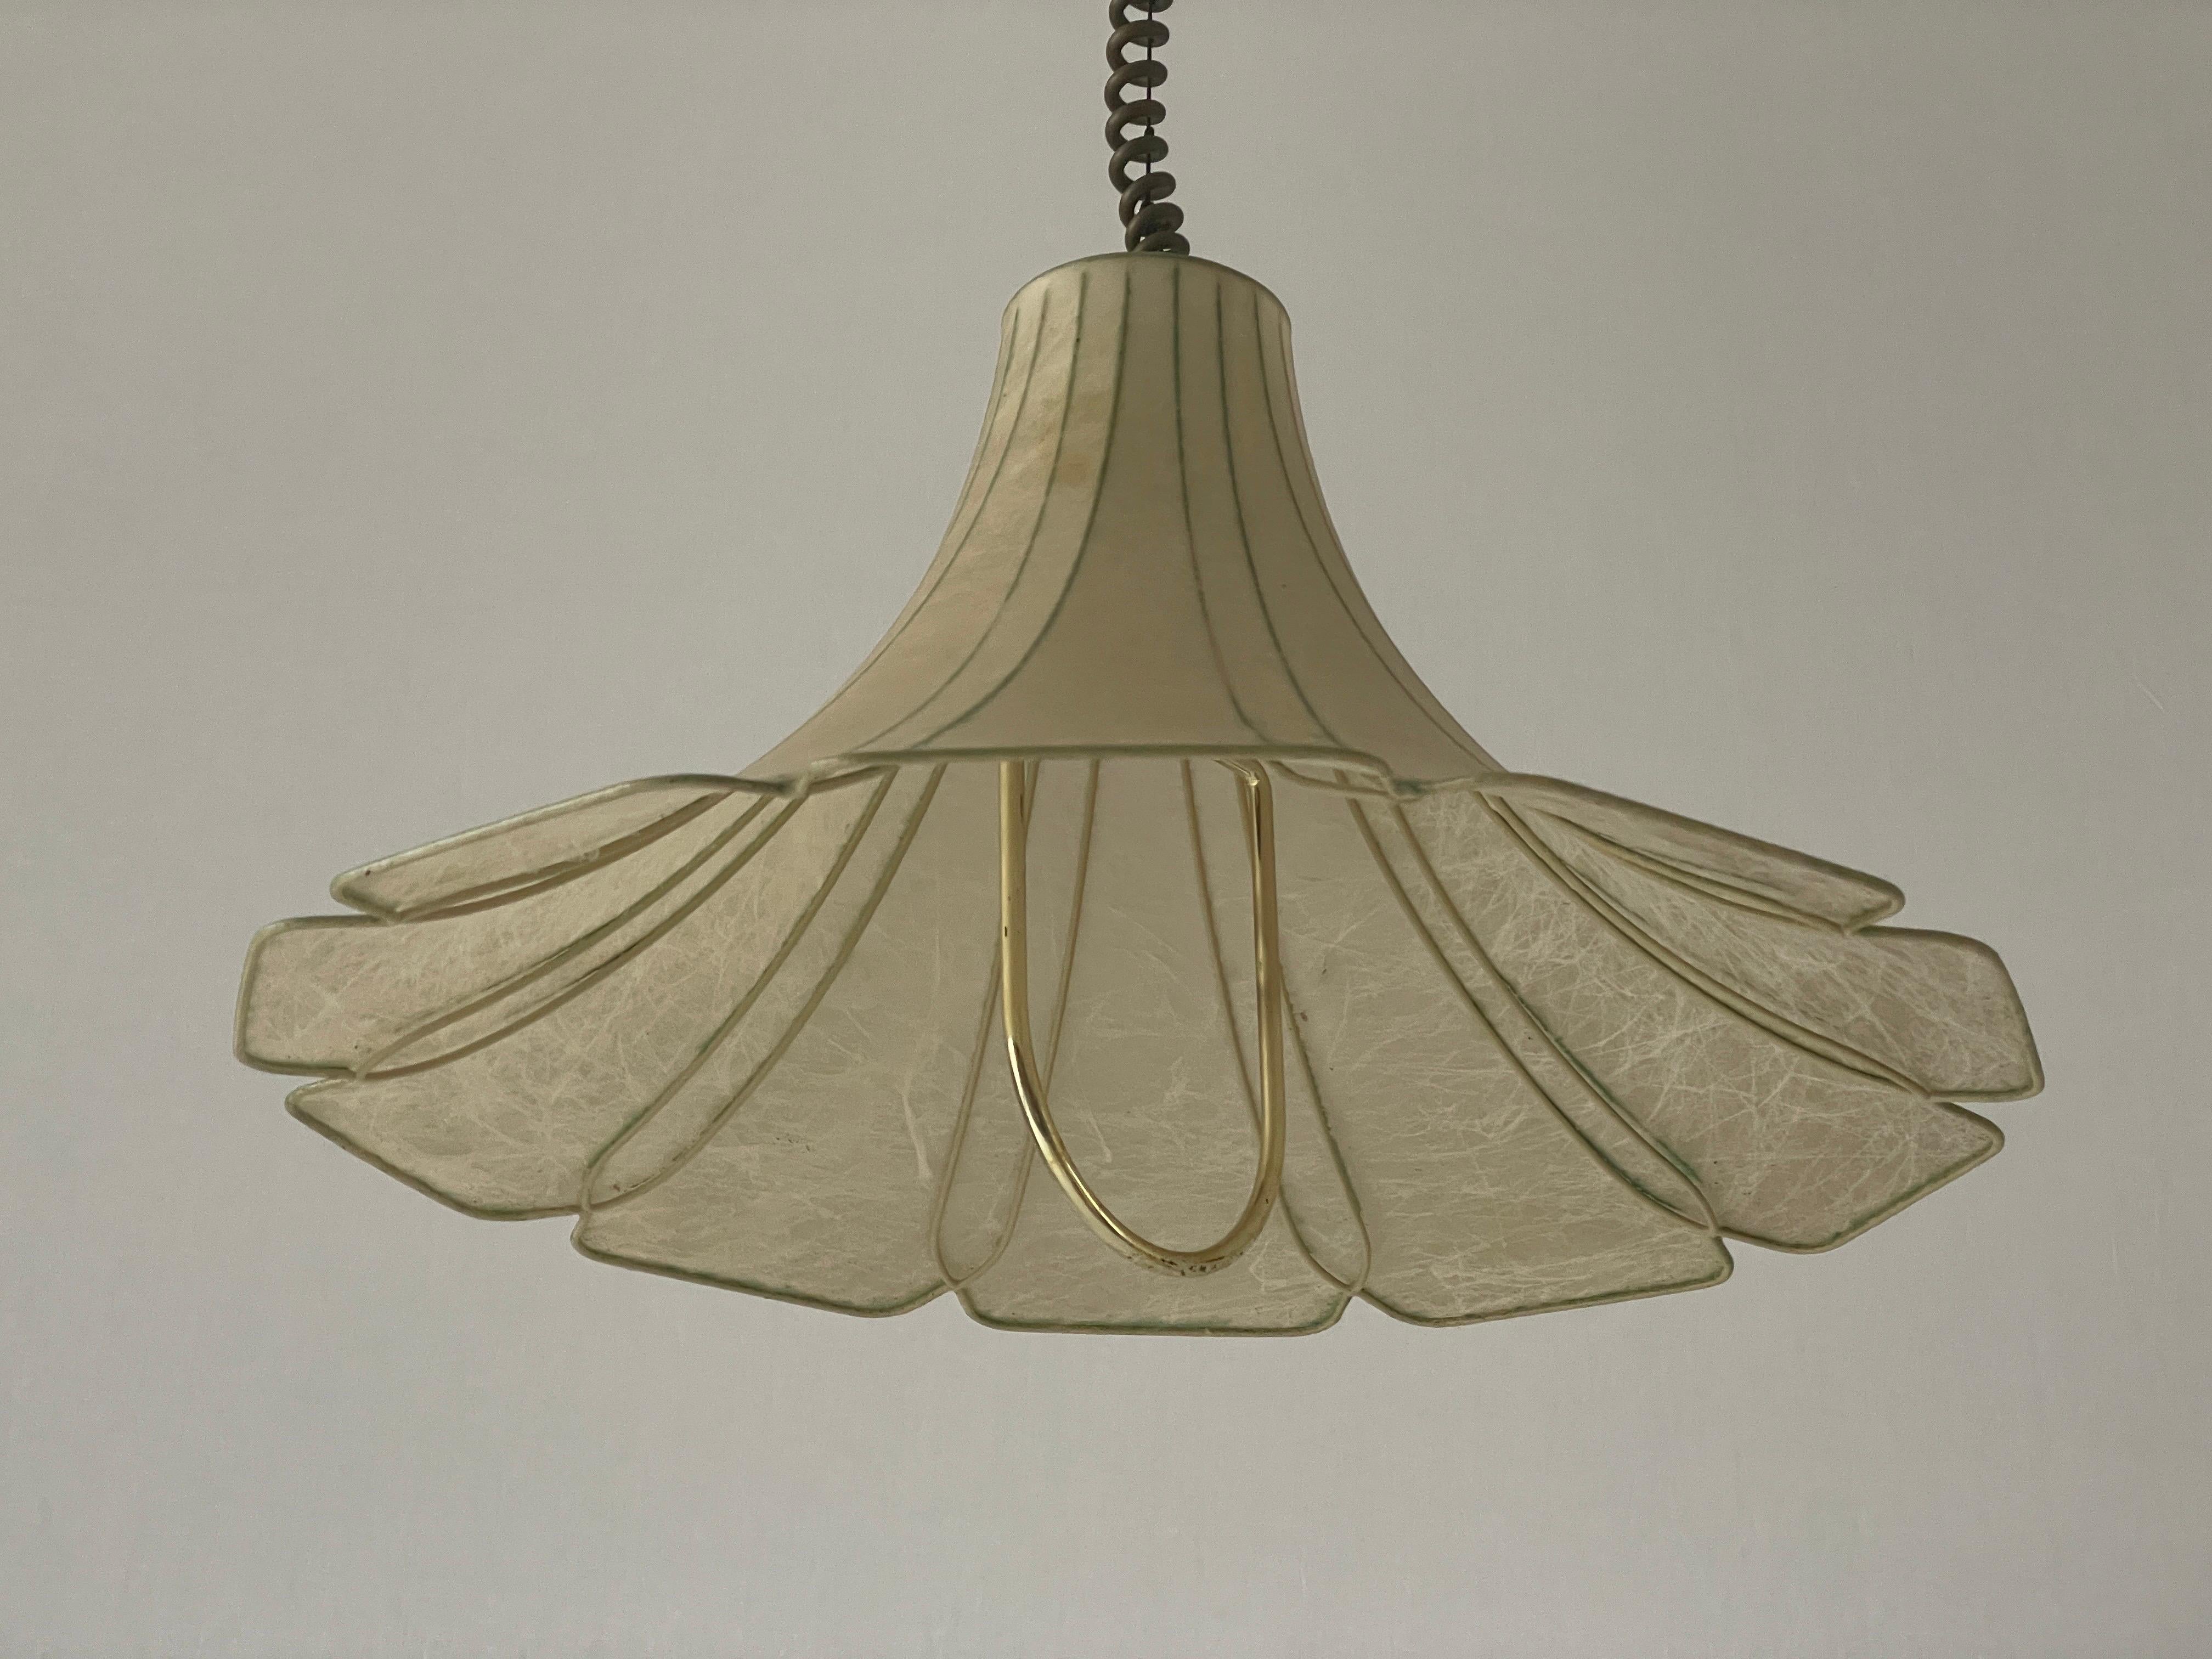 Tulip Design Cocoon Adjustable Height Pendant Lamp by Goldkant, 1960s, Germany

Lampshade is in very good vintage condition.

This lamp works with E27 light bulbs. 
Wired and suitable to use with 220V and 110V for all